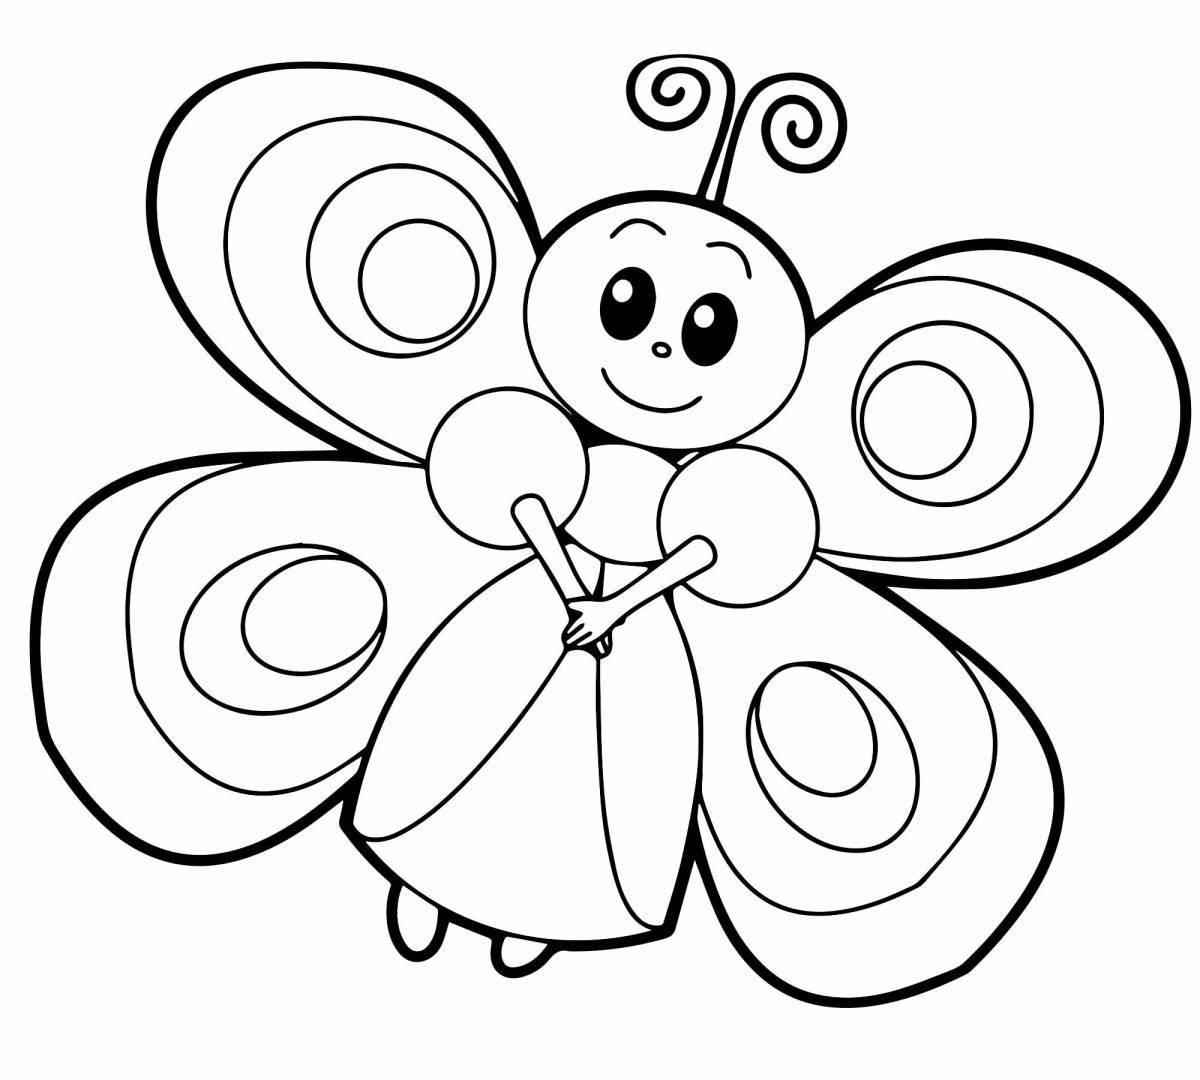 Great butterfly coloring book for kids